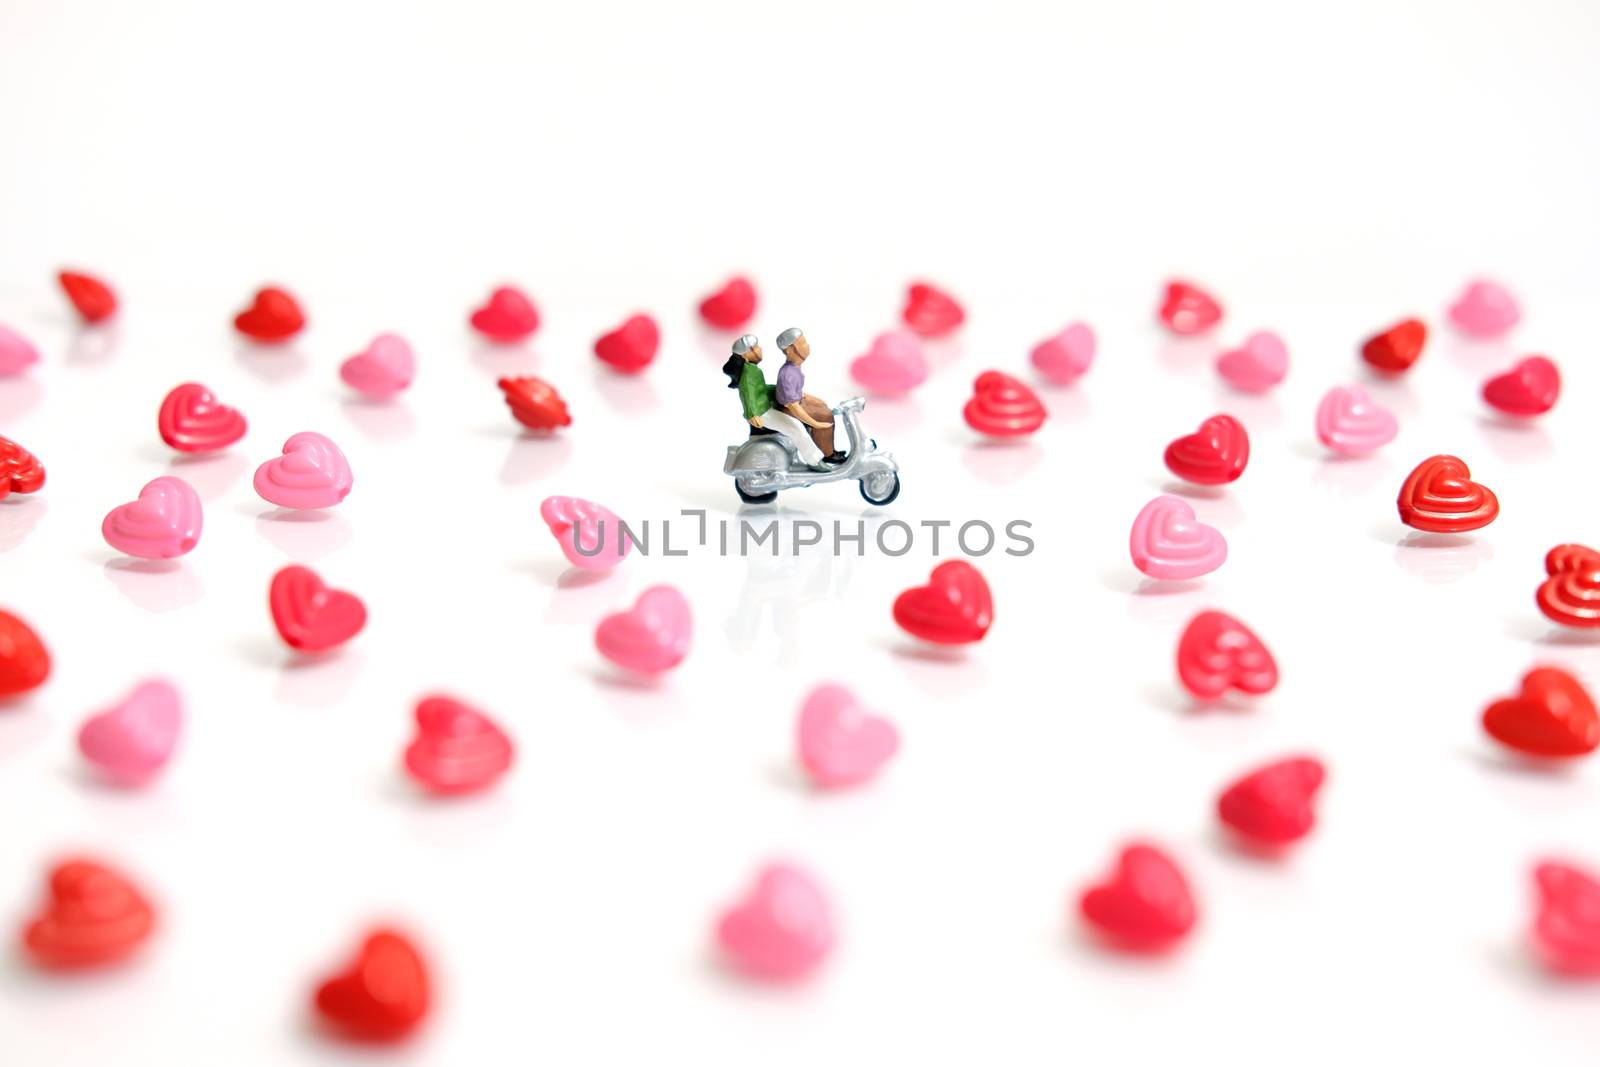 Miniature people photography for valentines day, young couple riding scooter with I love you beads on shiny white background by Macrostud